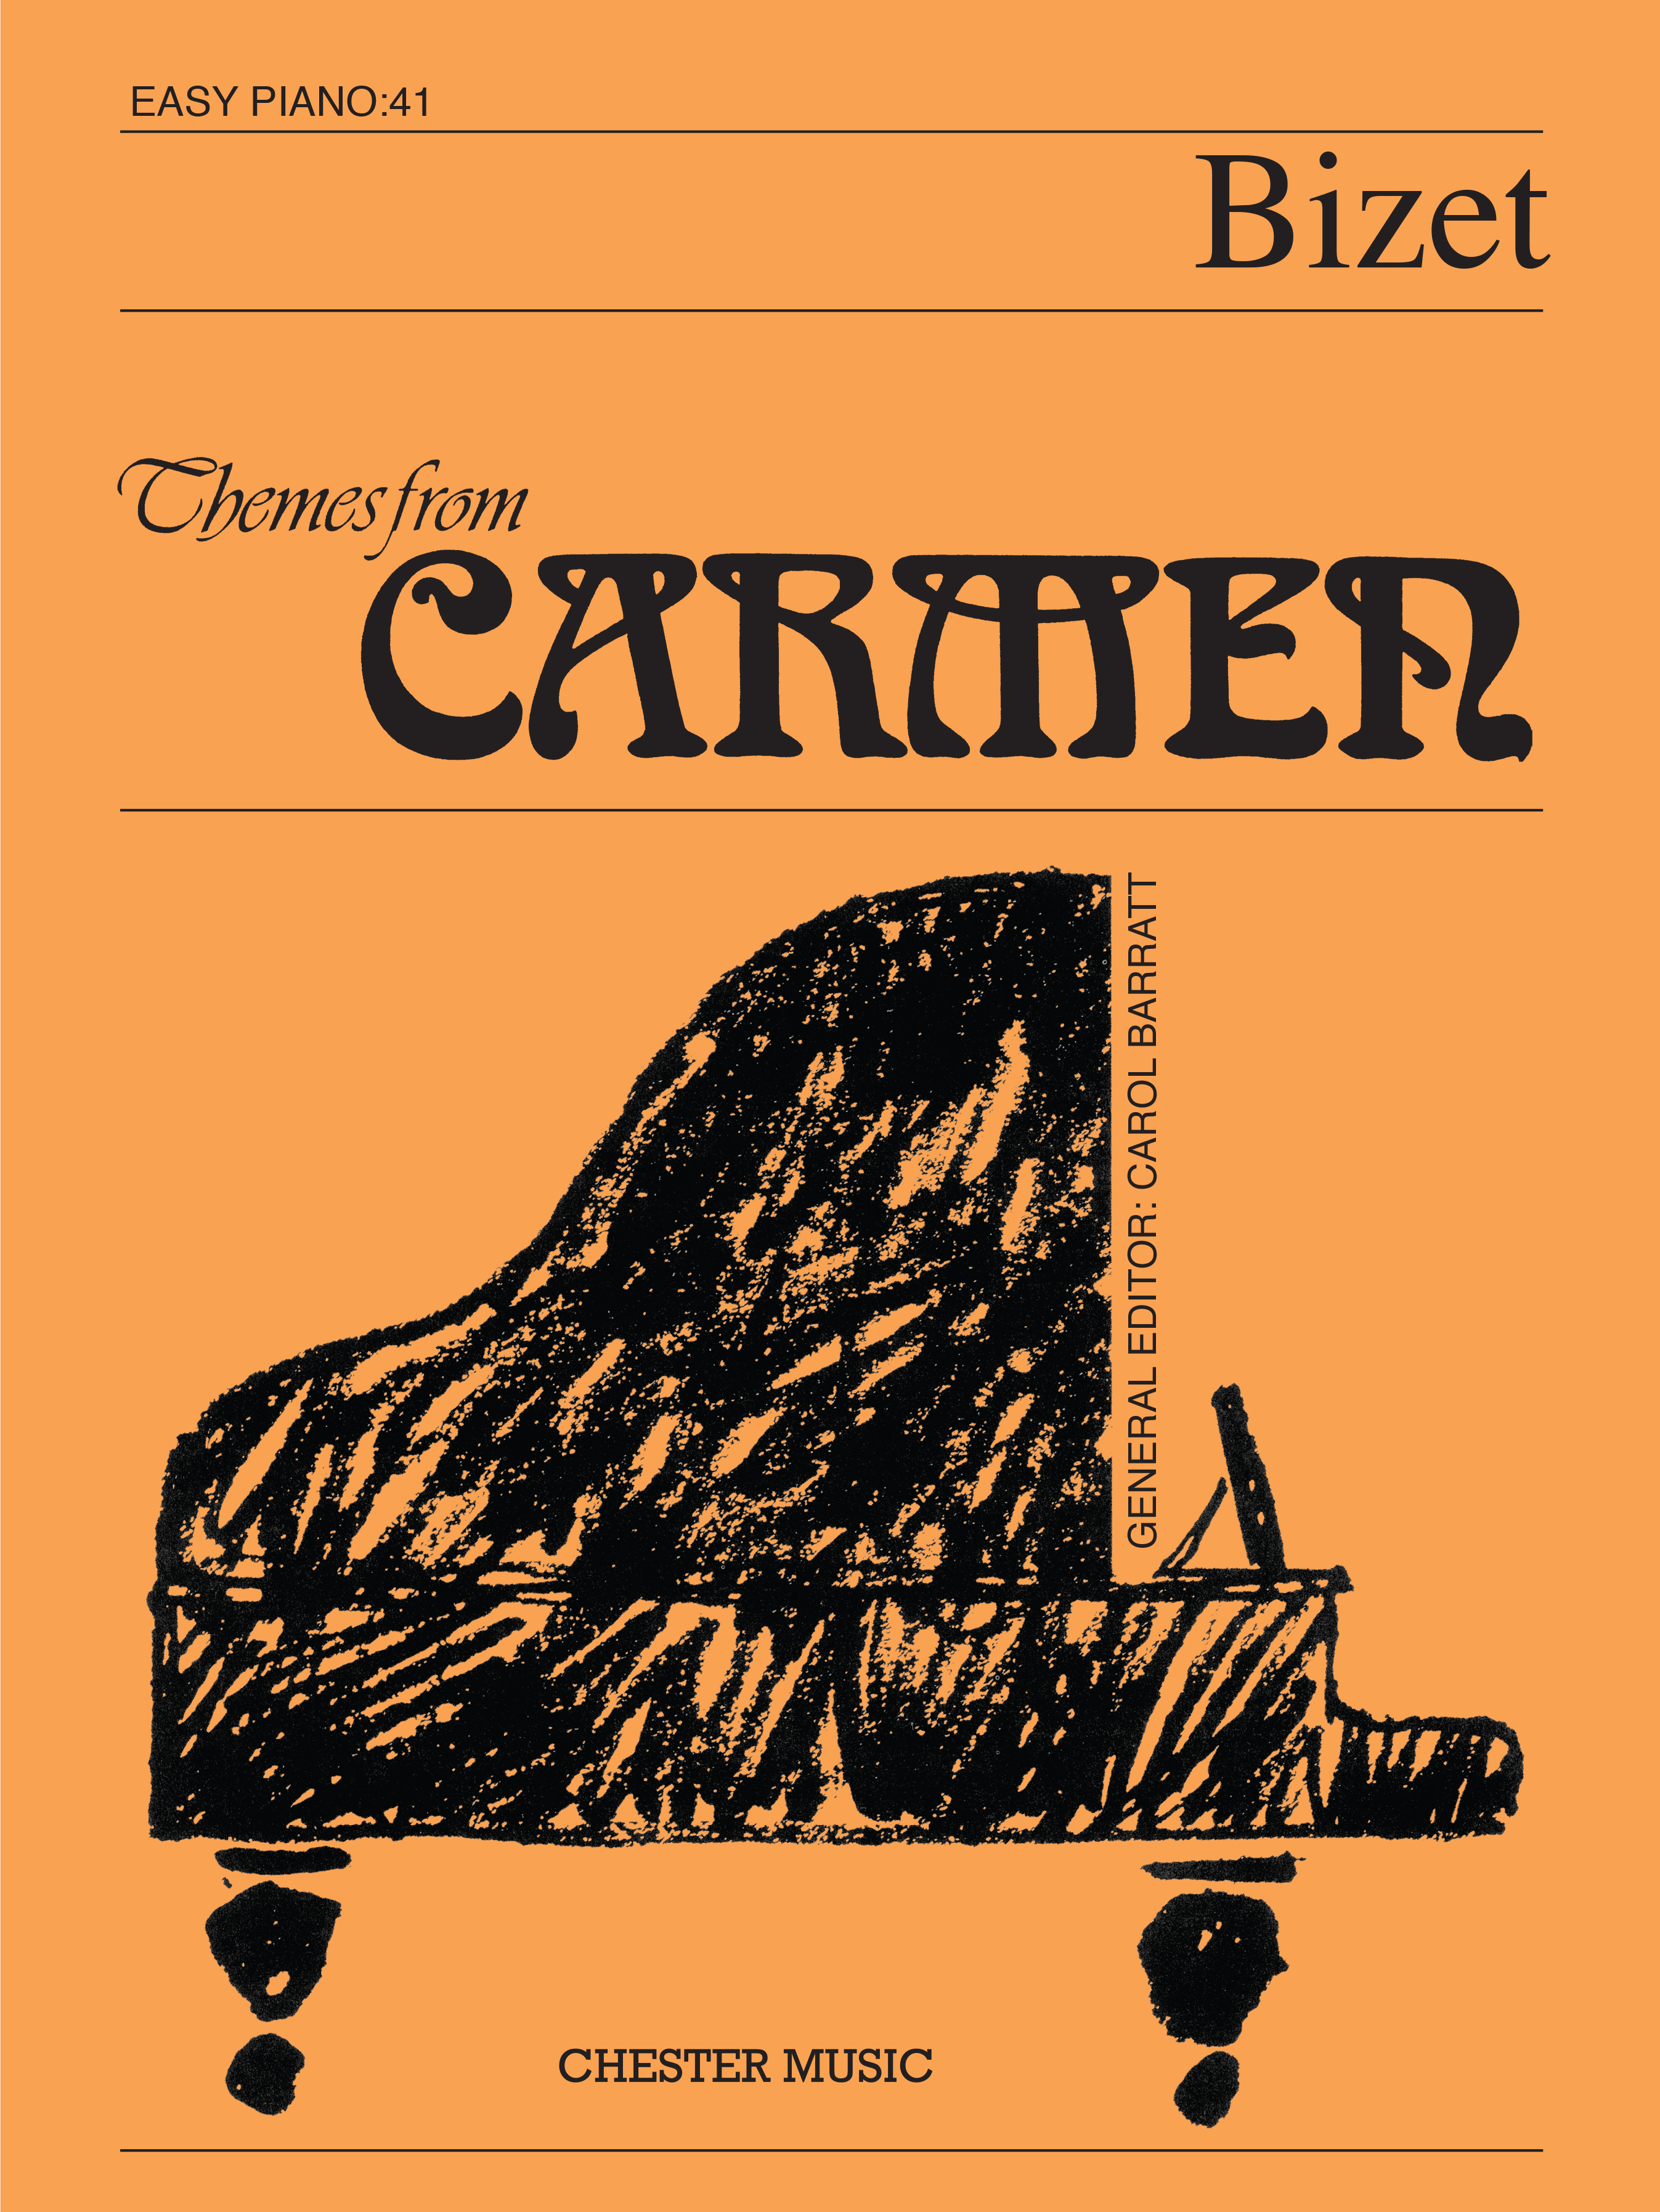 Georges Bizet: Themes From Carmen (Easy Piano No.41): Easy Piano: Single Sheet